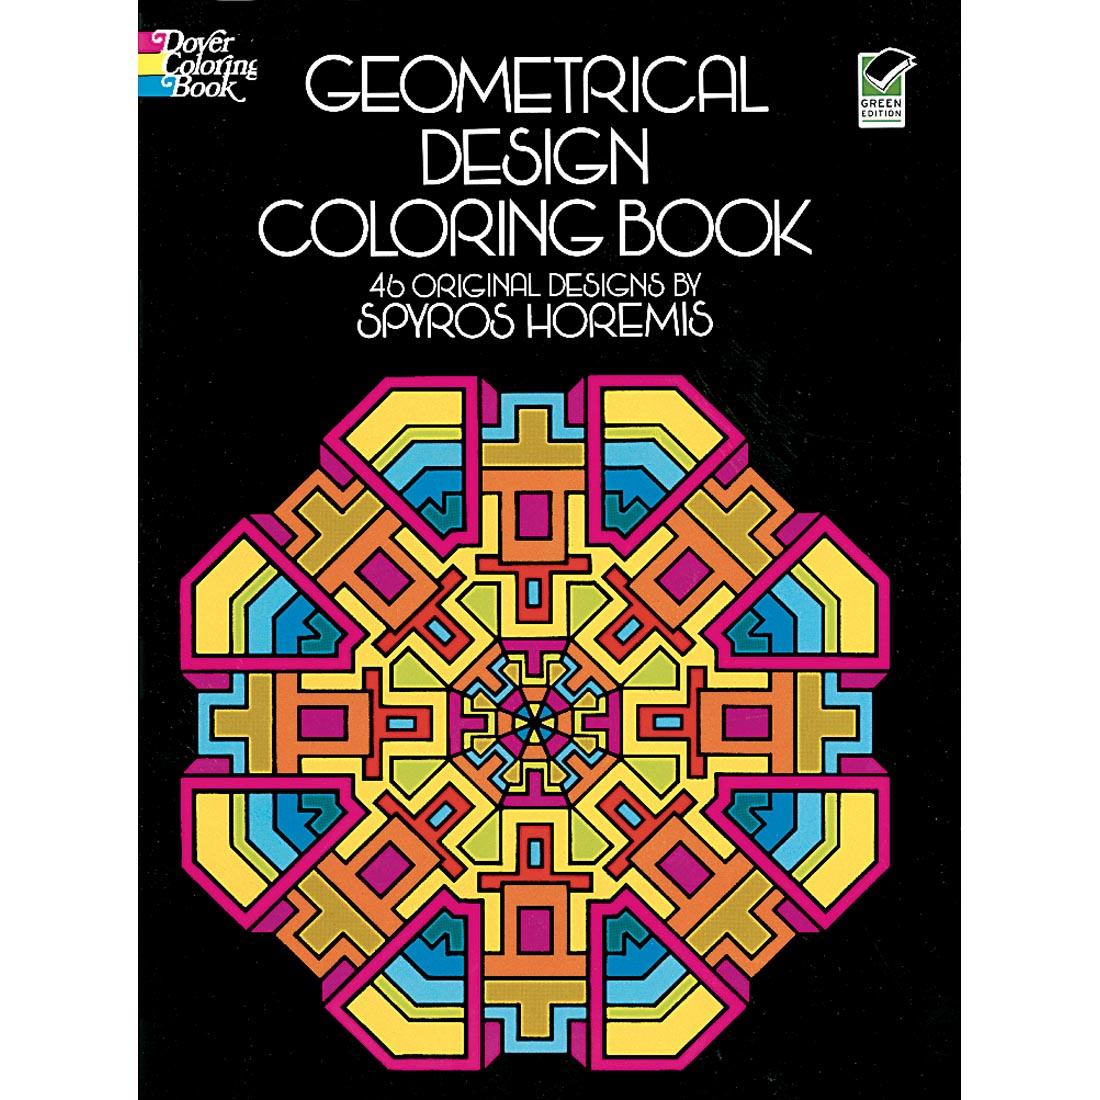 Geometrical Design Coloring Book by Dover